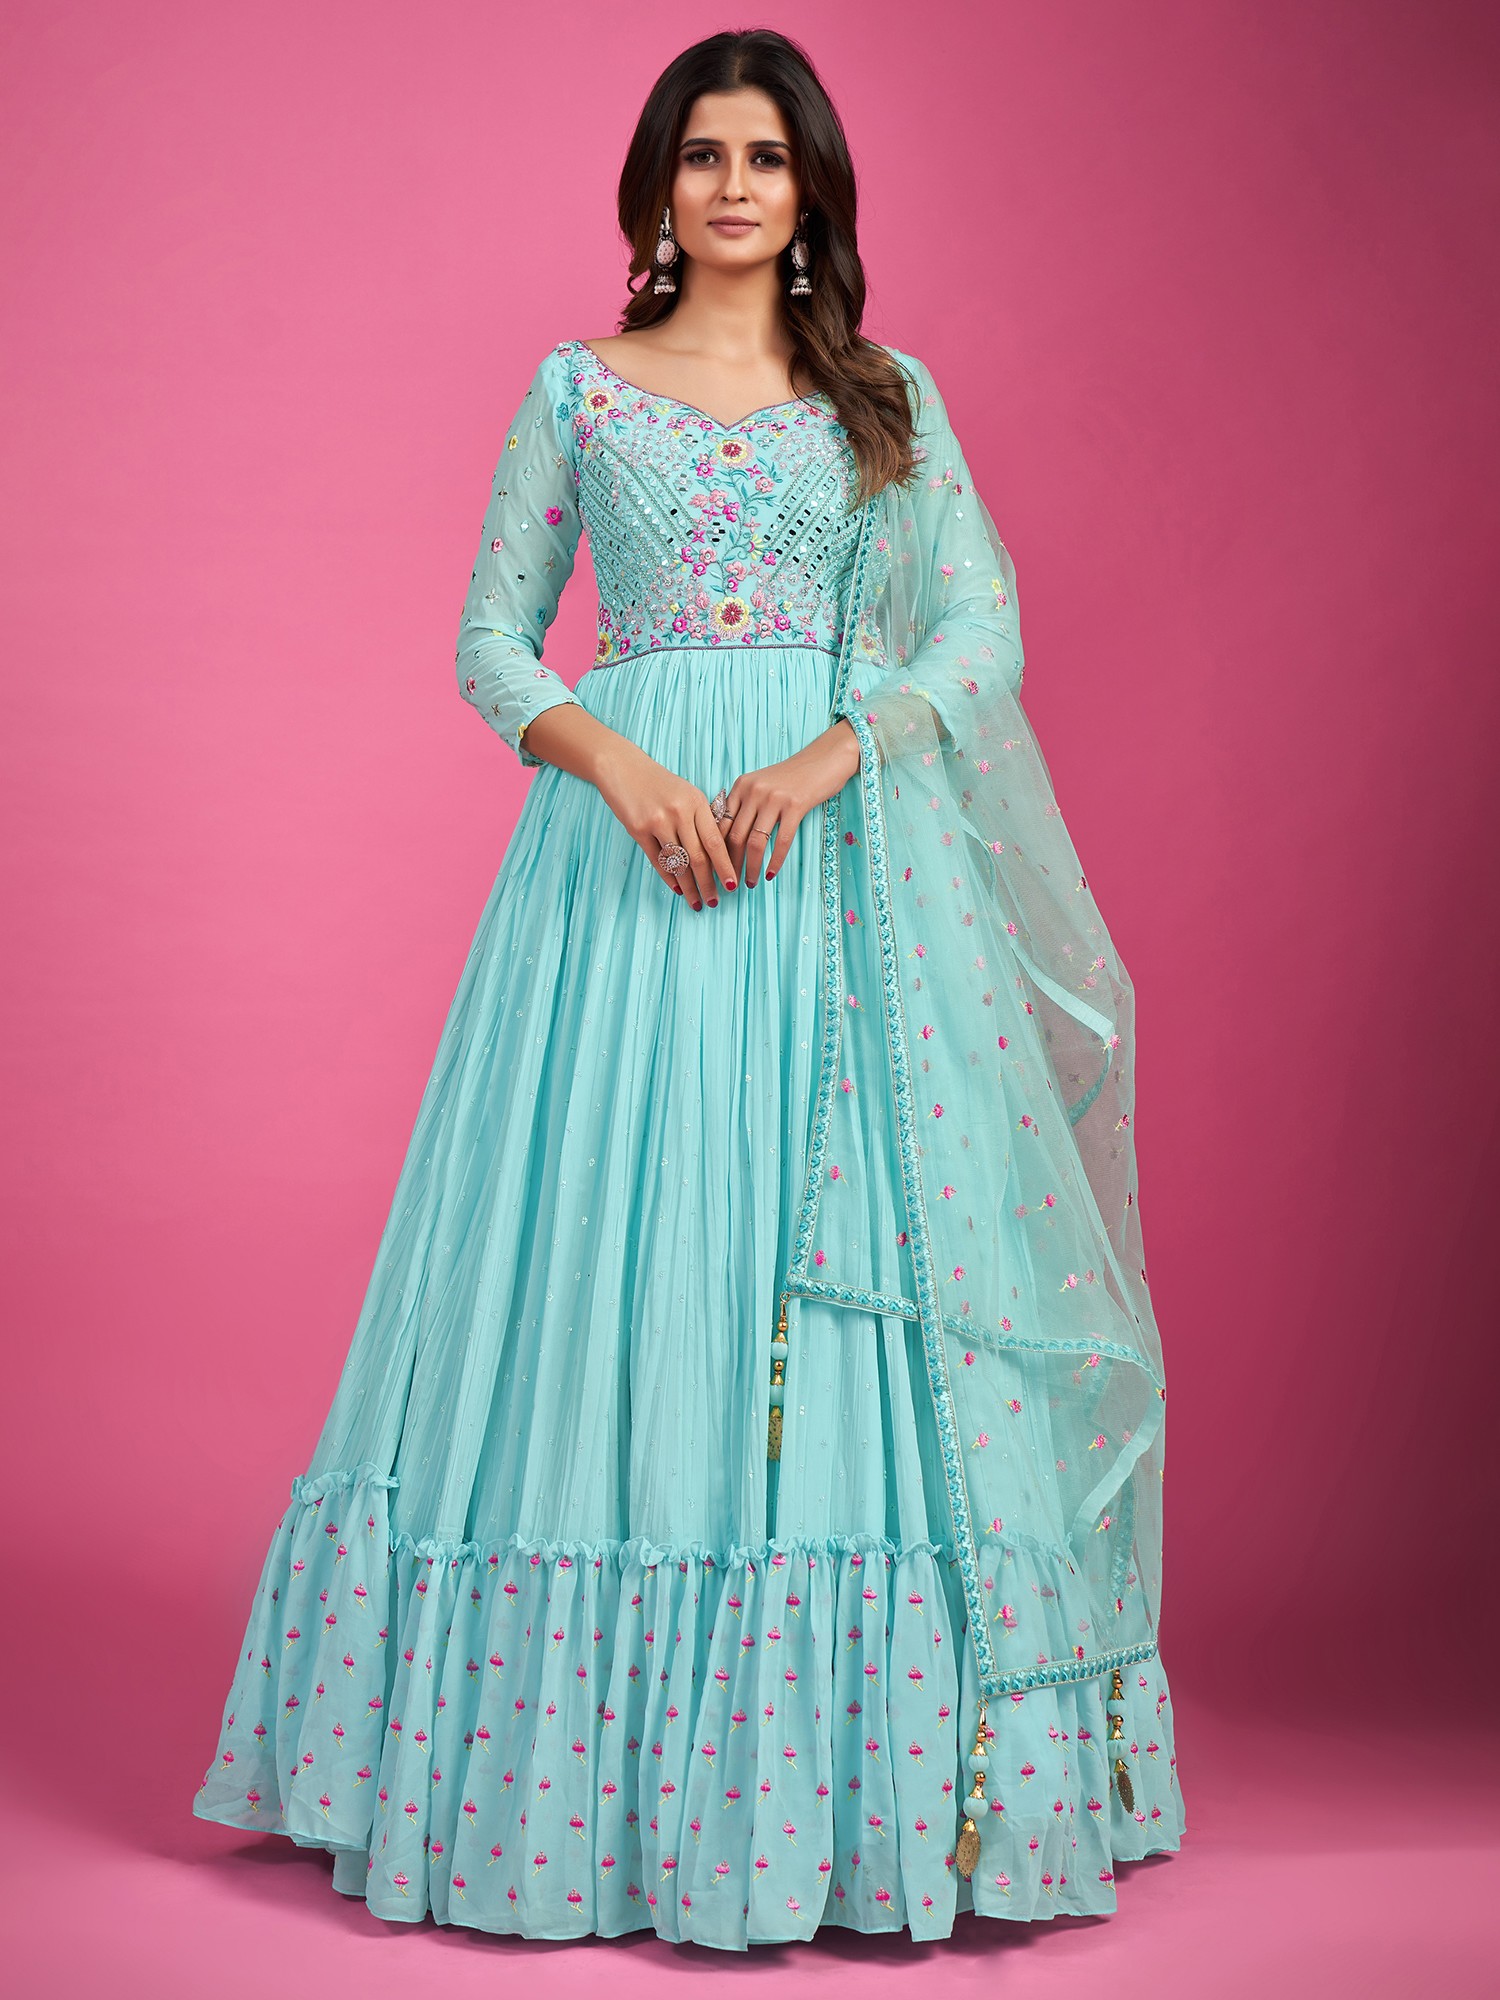 Embroidered Art Silk Anarkali in Navy Blue | Elegant Ethnic Wear | Silk  anarkali suits, Anarkali dress, Blue embroidery